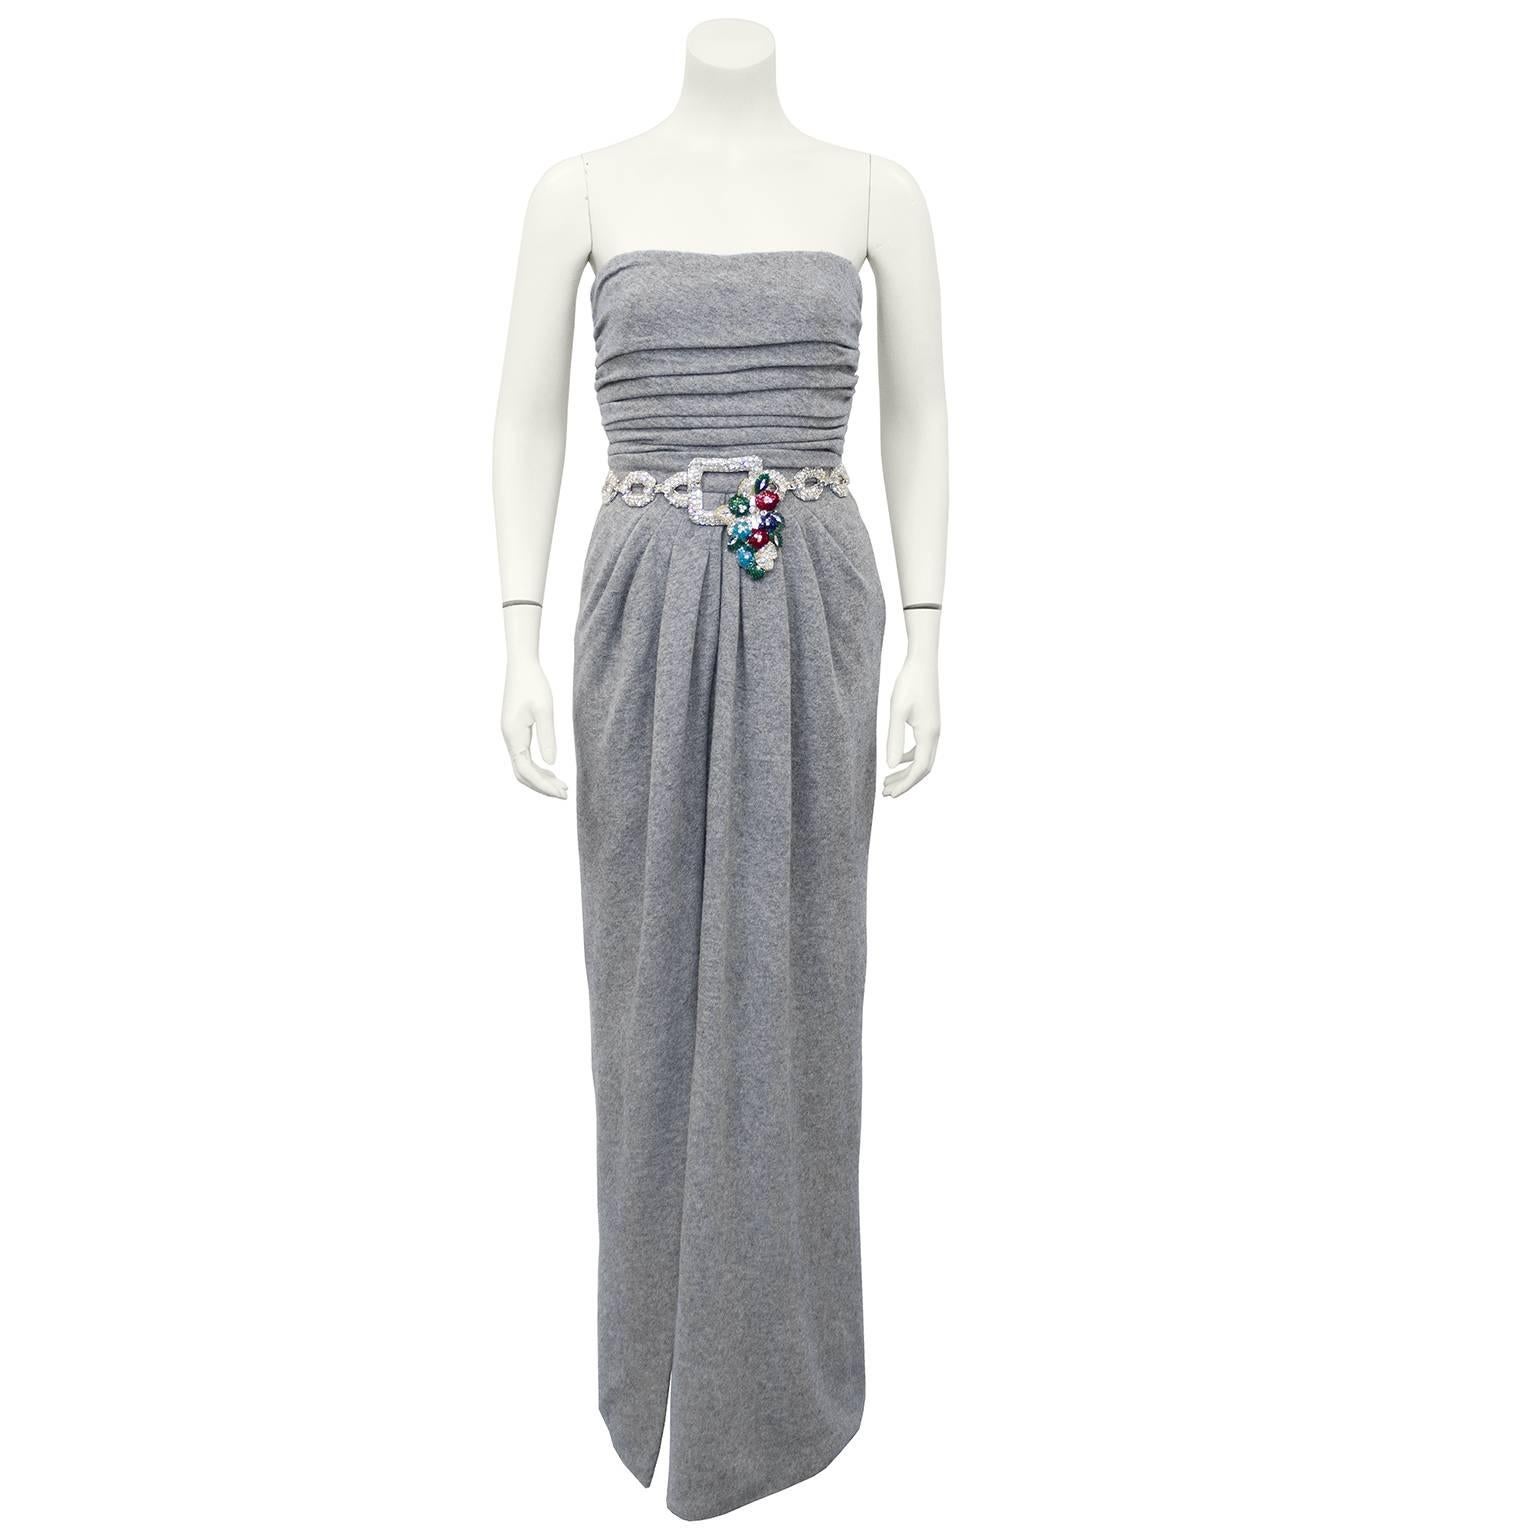 1980's Carolyne Roehm grey cashmere gown and cardigan ensemble. Stunning strapless dress with ruching at bodice and slight leg slit. Beautiful embellishment mimicking a belt from tiny silver sequins and beads. Matching cardigan to be worn on top.